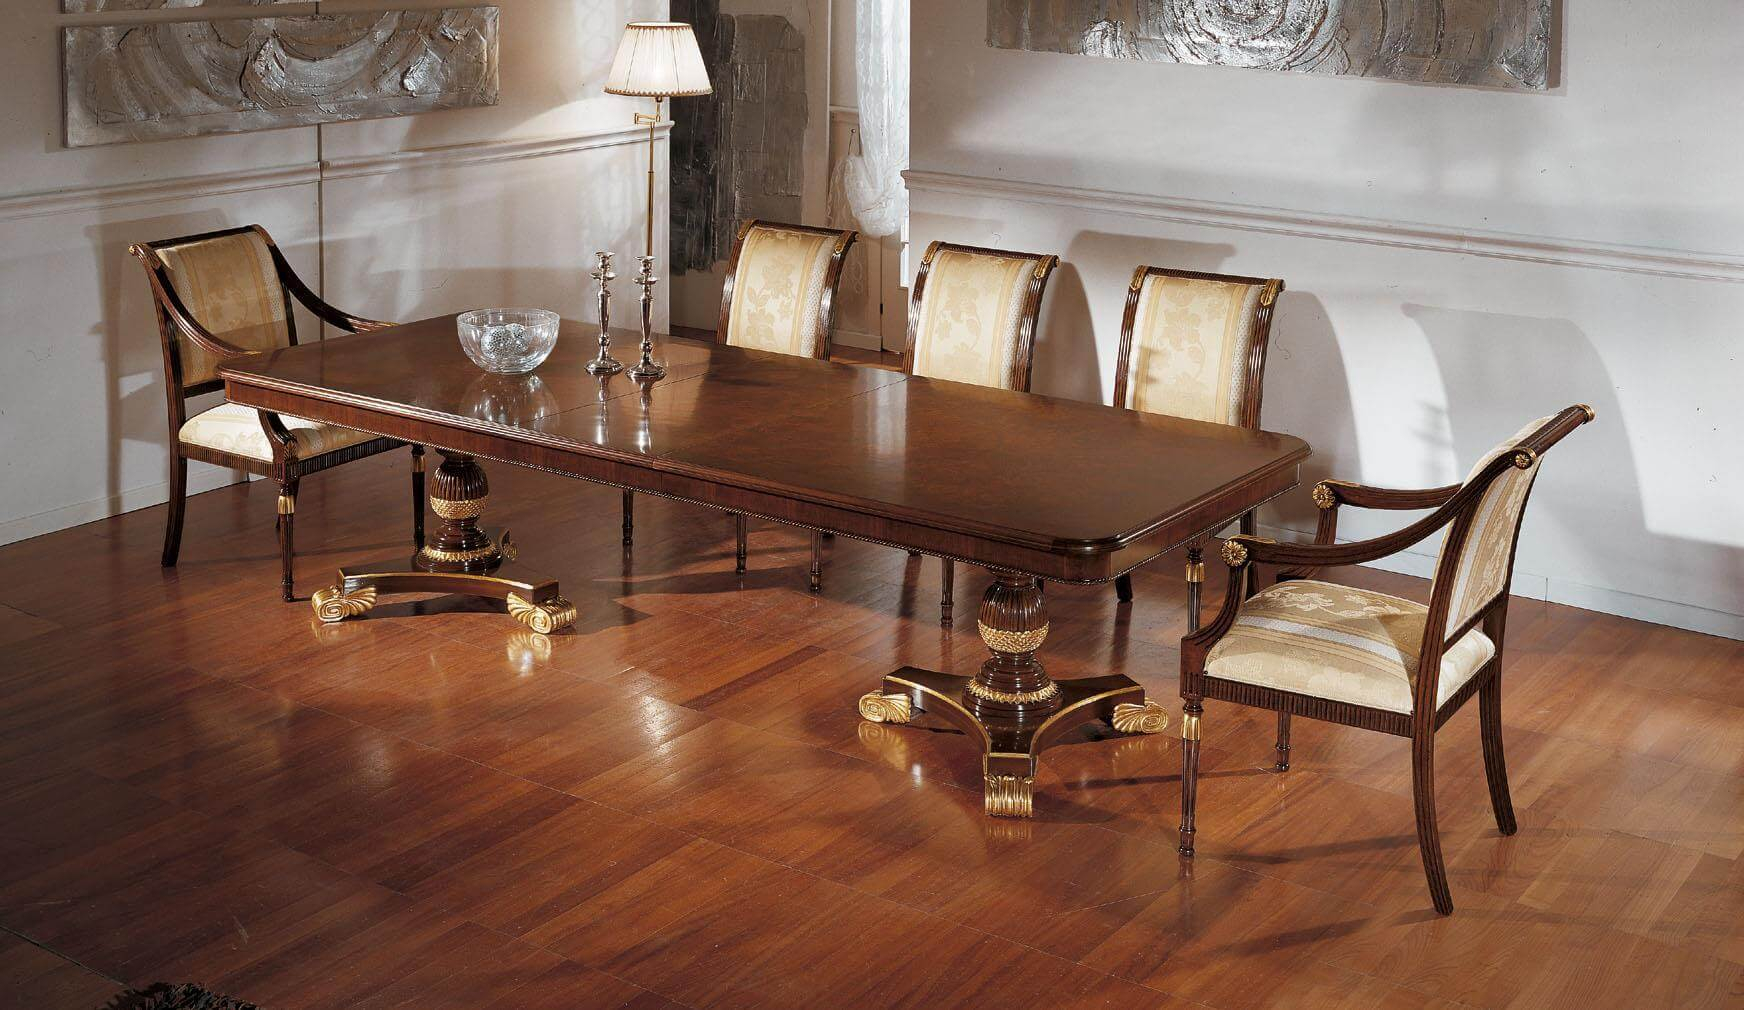 Italian Dining Room Table And Chairs